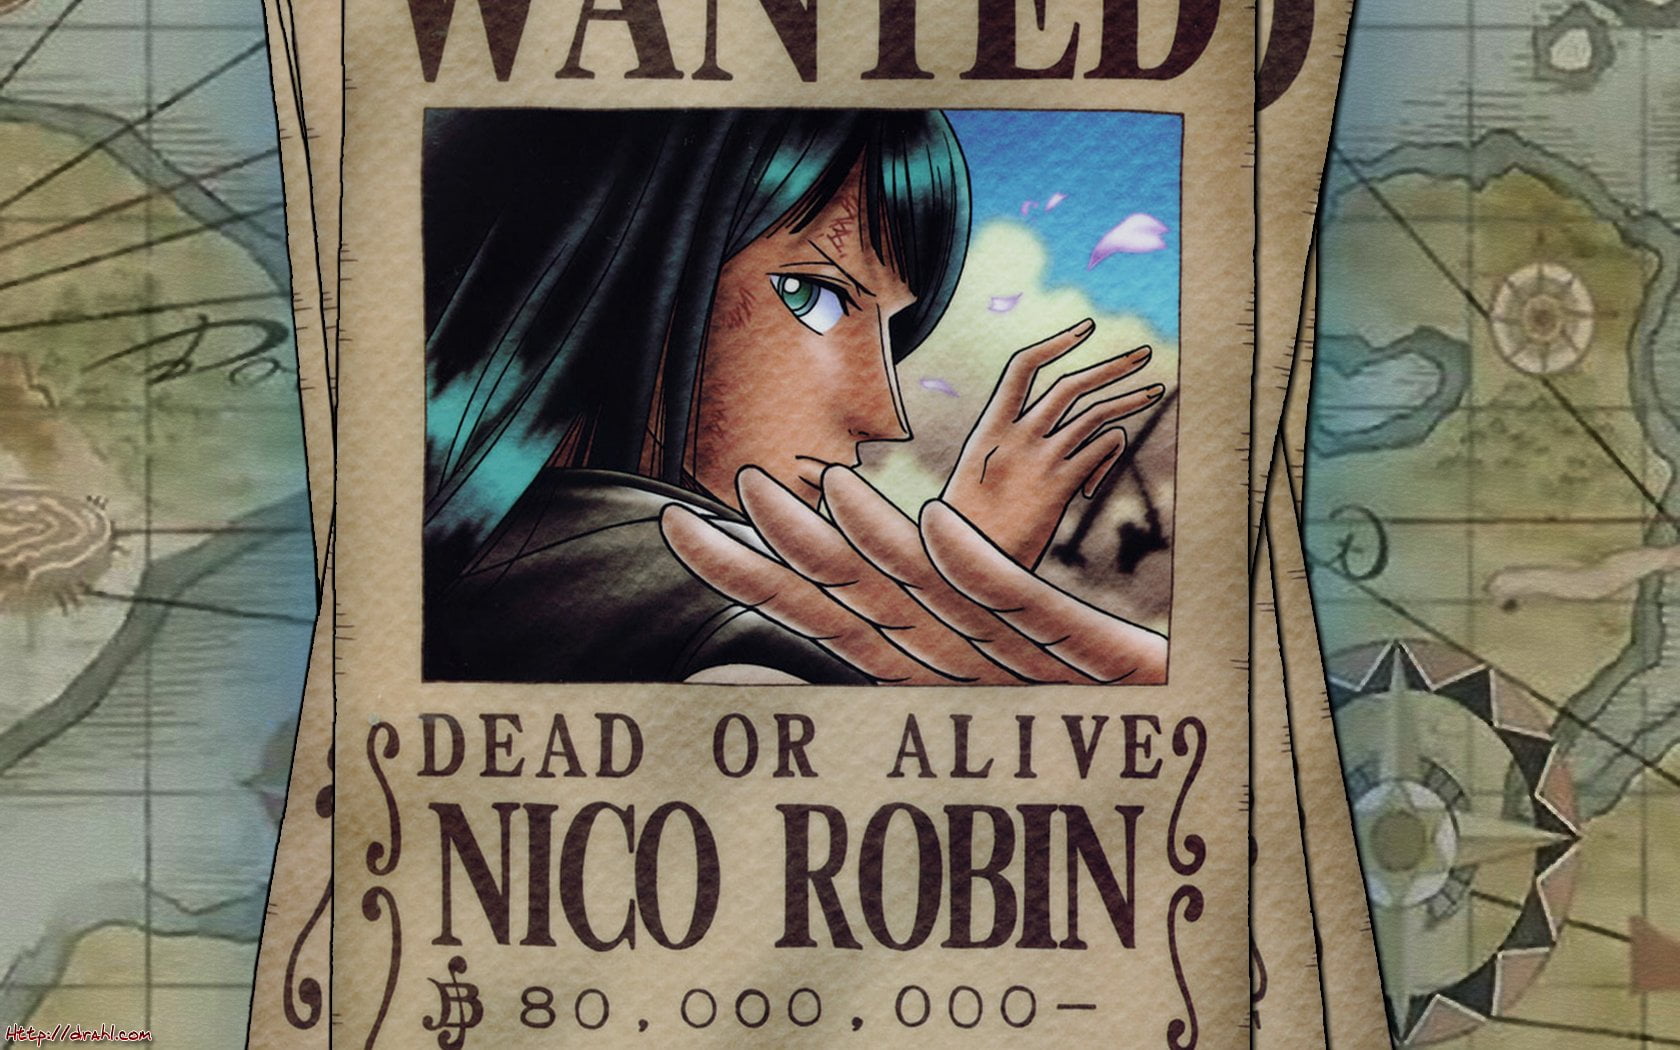 One Piece Nico Robin wanted poster digital wallpaper, Anime, text